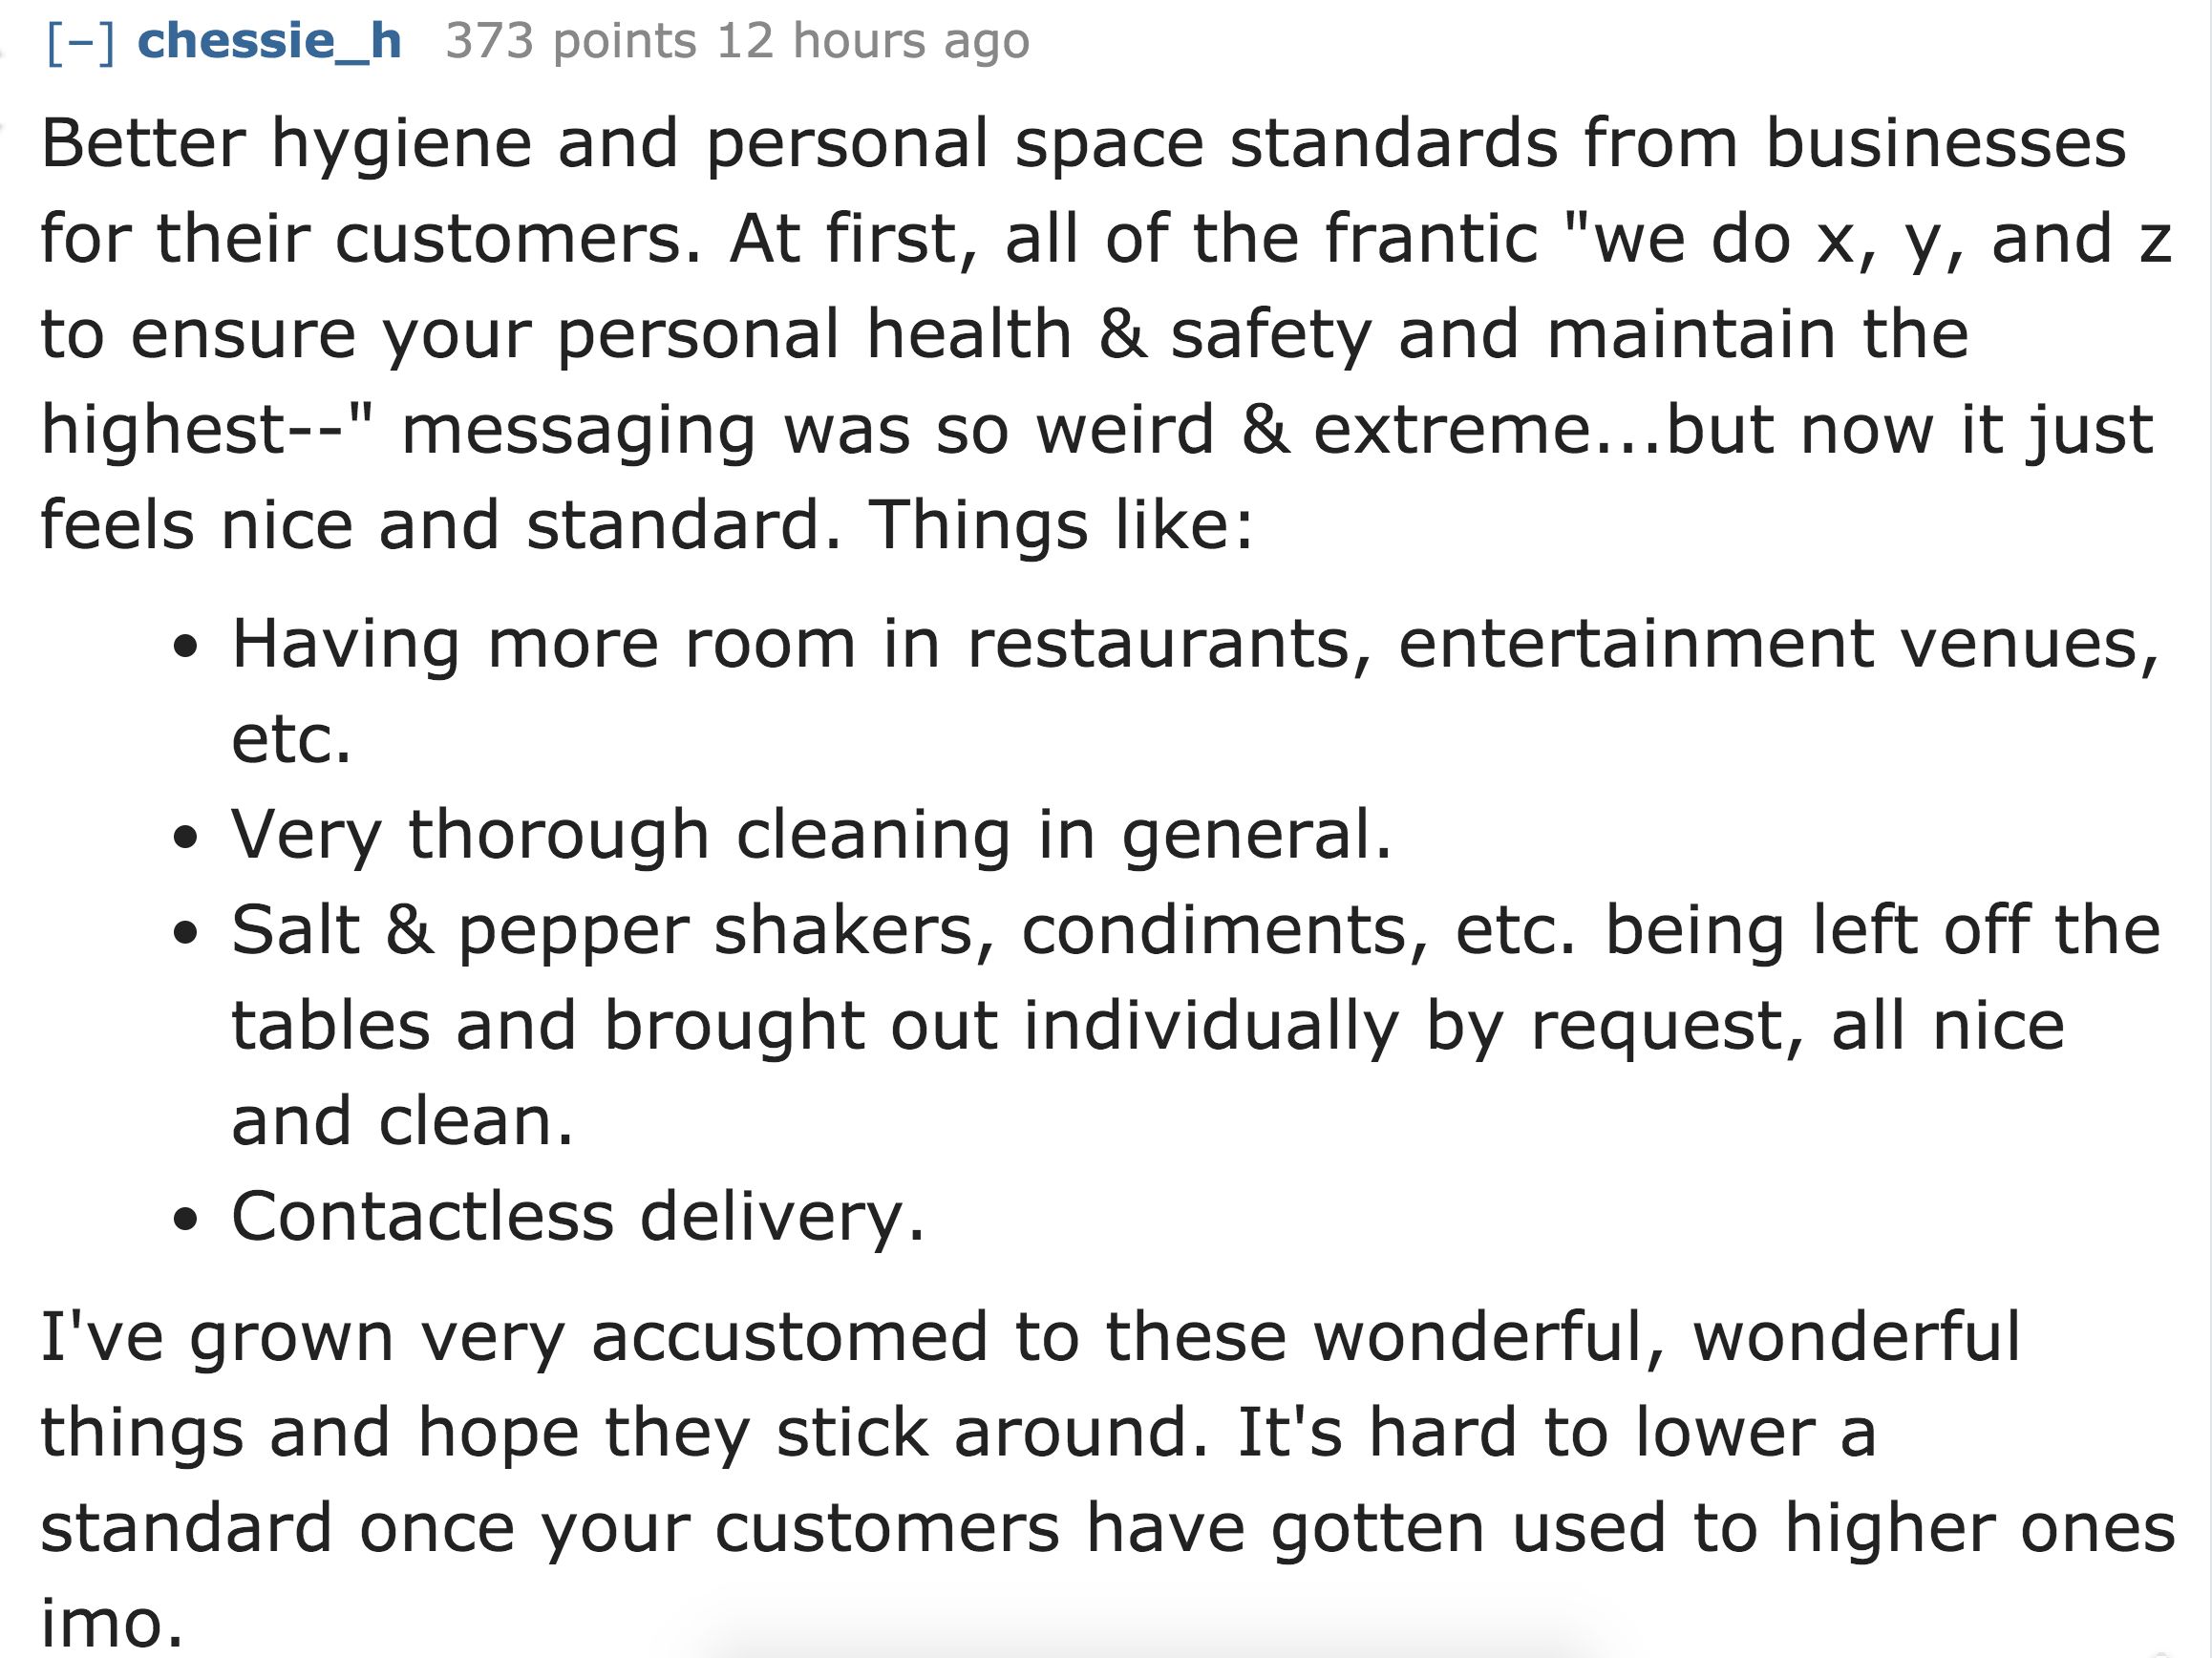 Better hygiene and personal space standards from businesses for their customers. At first, all of the frantic